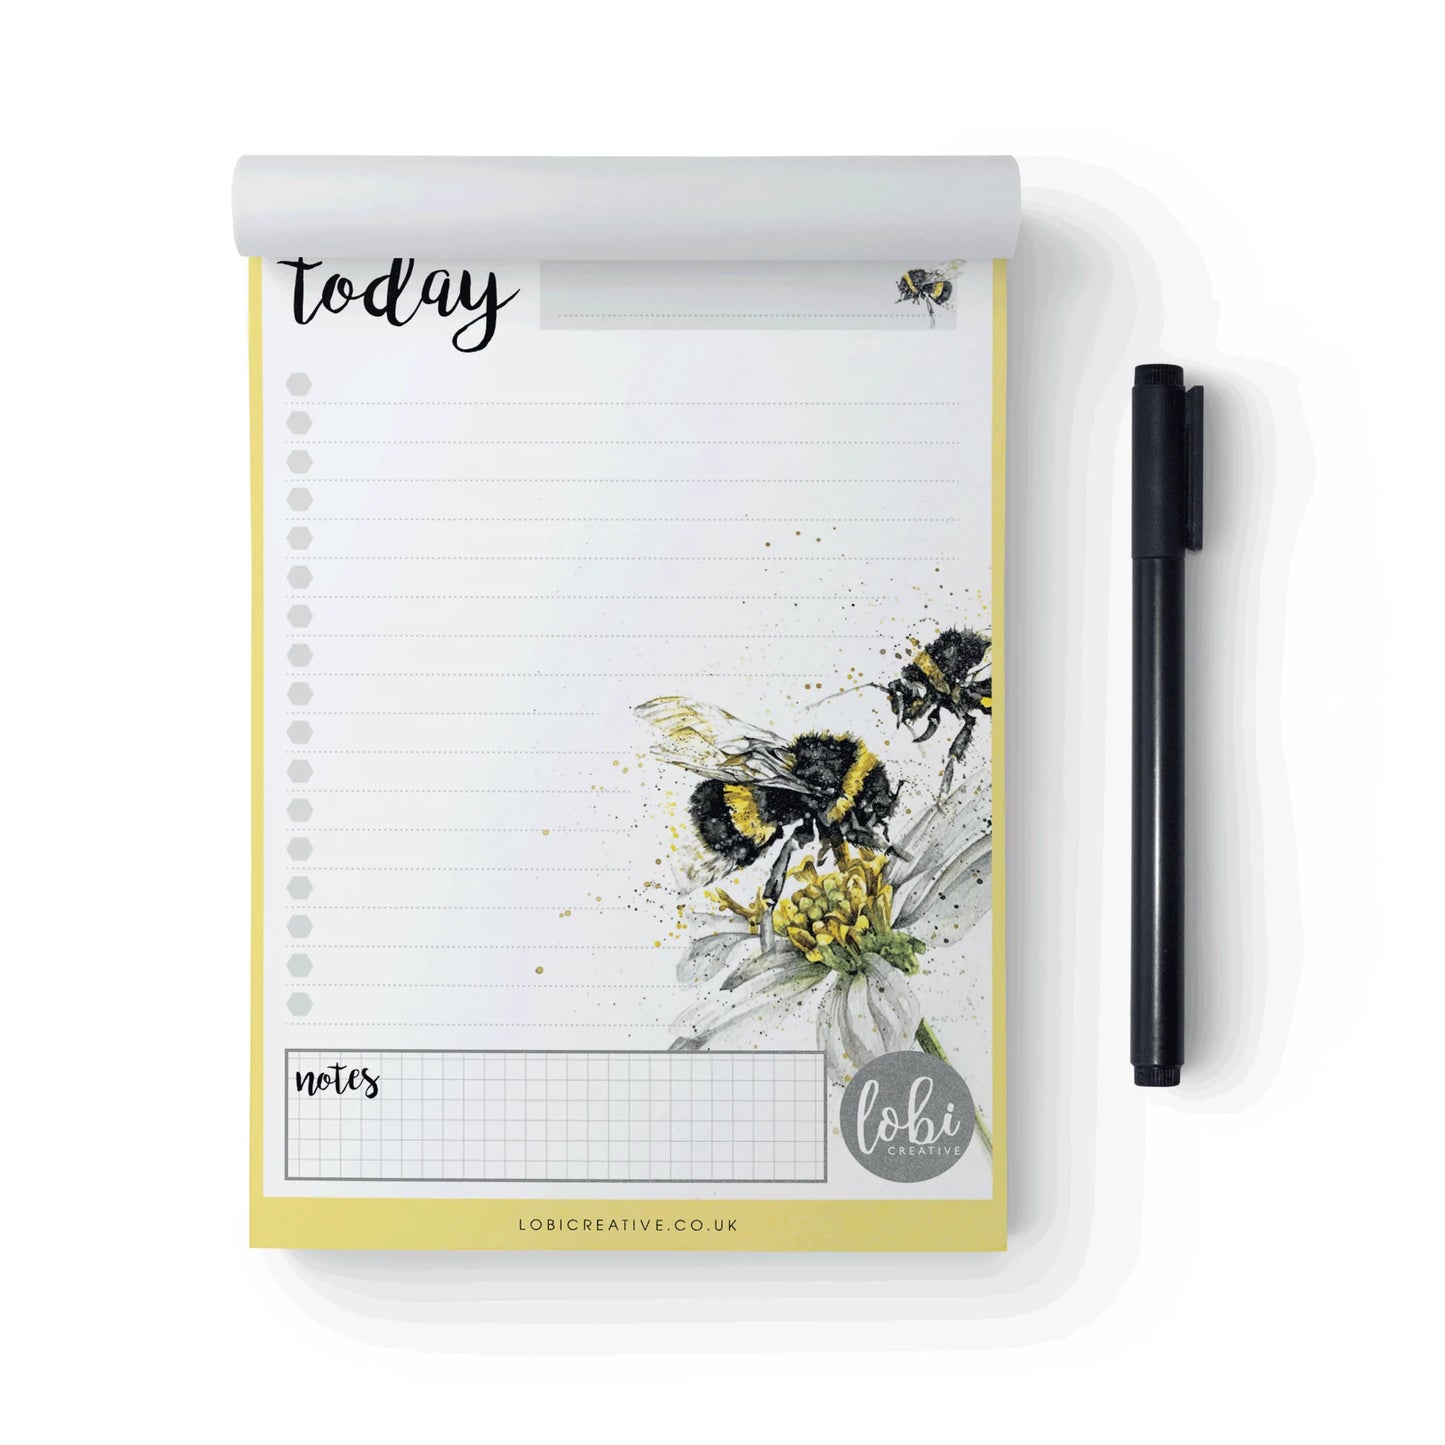 Eco friendly notepad for everyday task lists with artists drawing of Bees on the right hand side of page